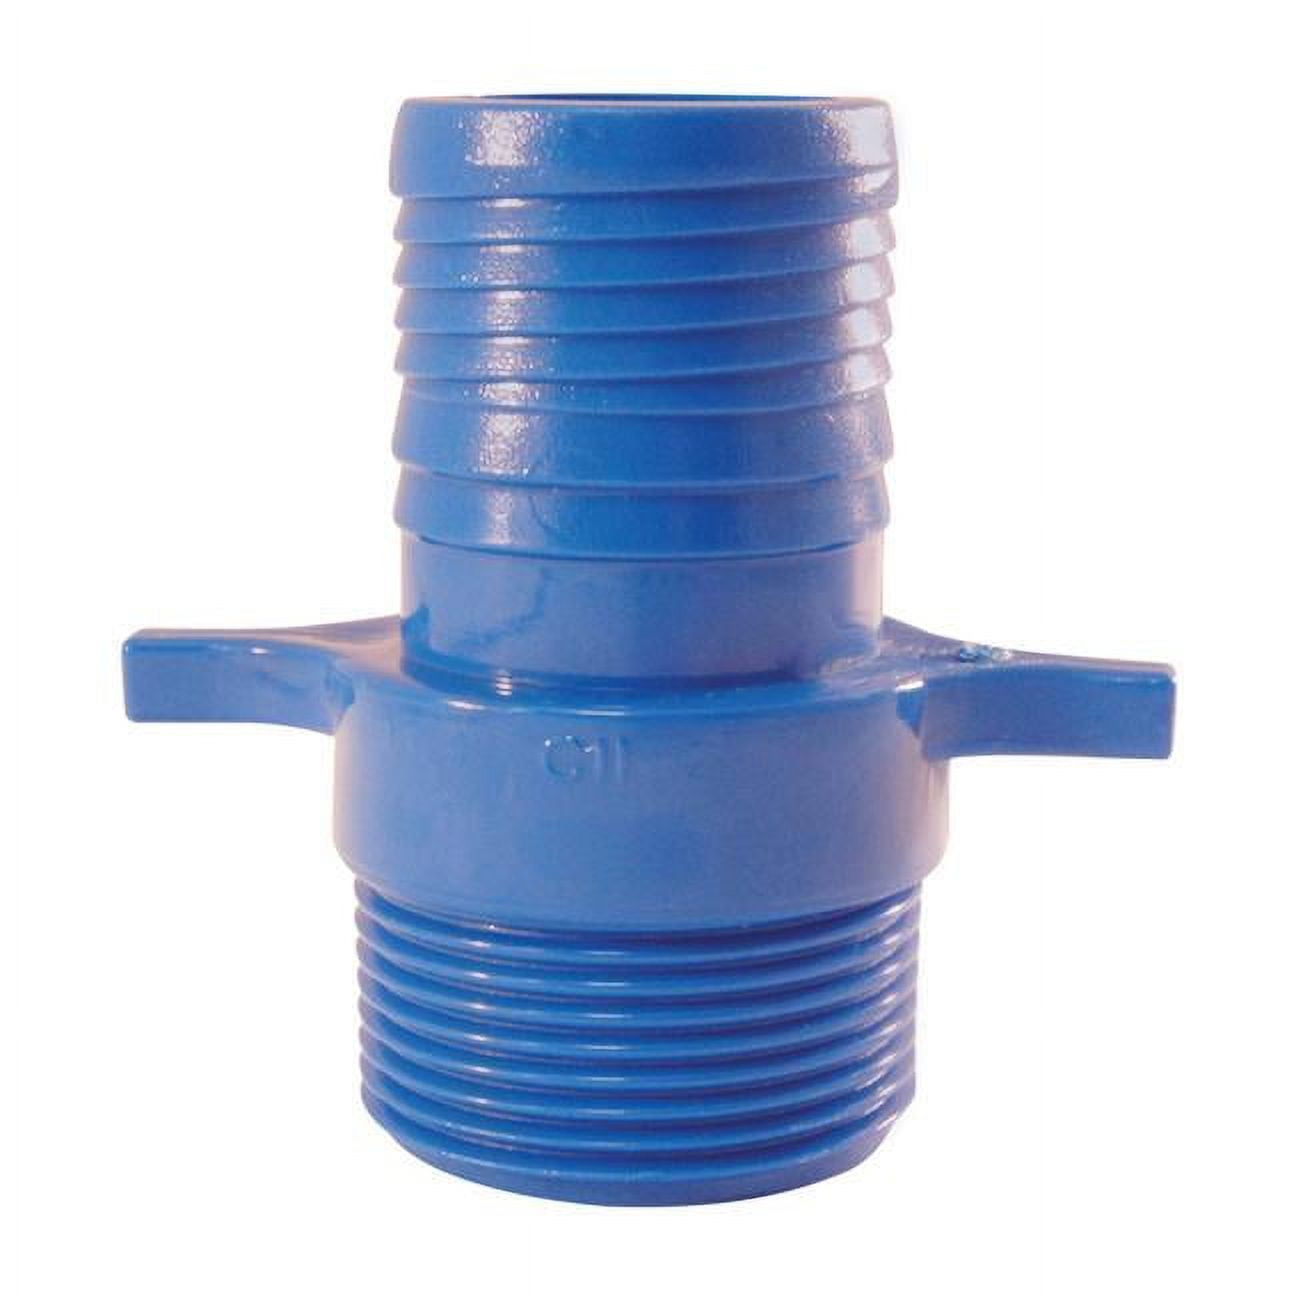 4814687 1 In. Insert X 1 In. Dia. Mpt Polypropylene Male Adapter, Blue - Pack Of 5